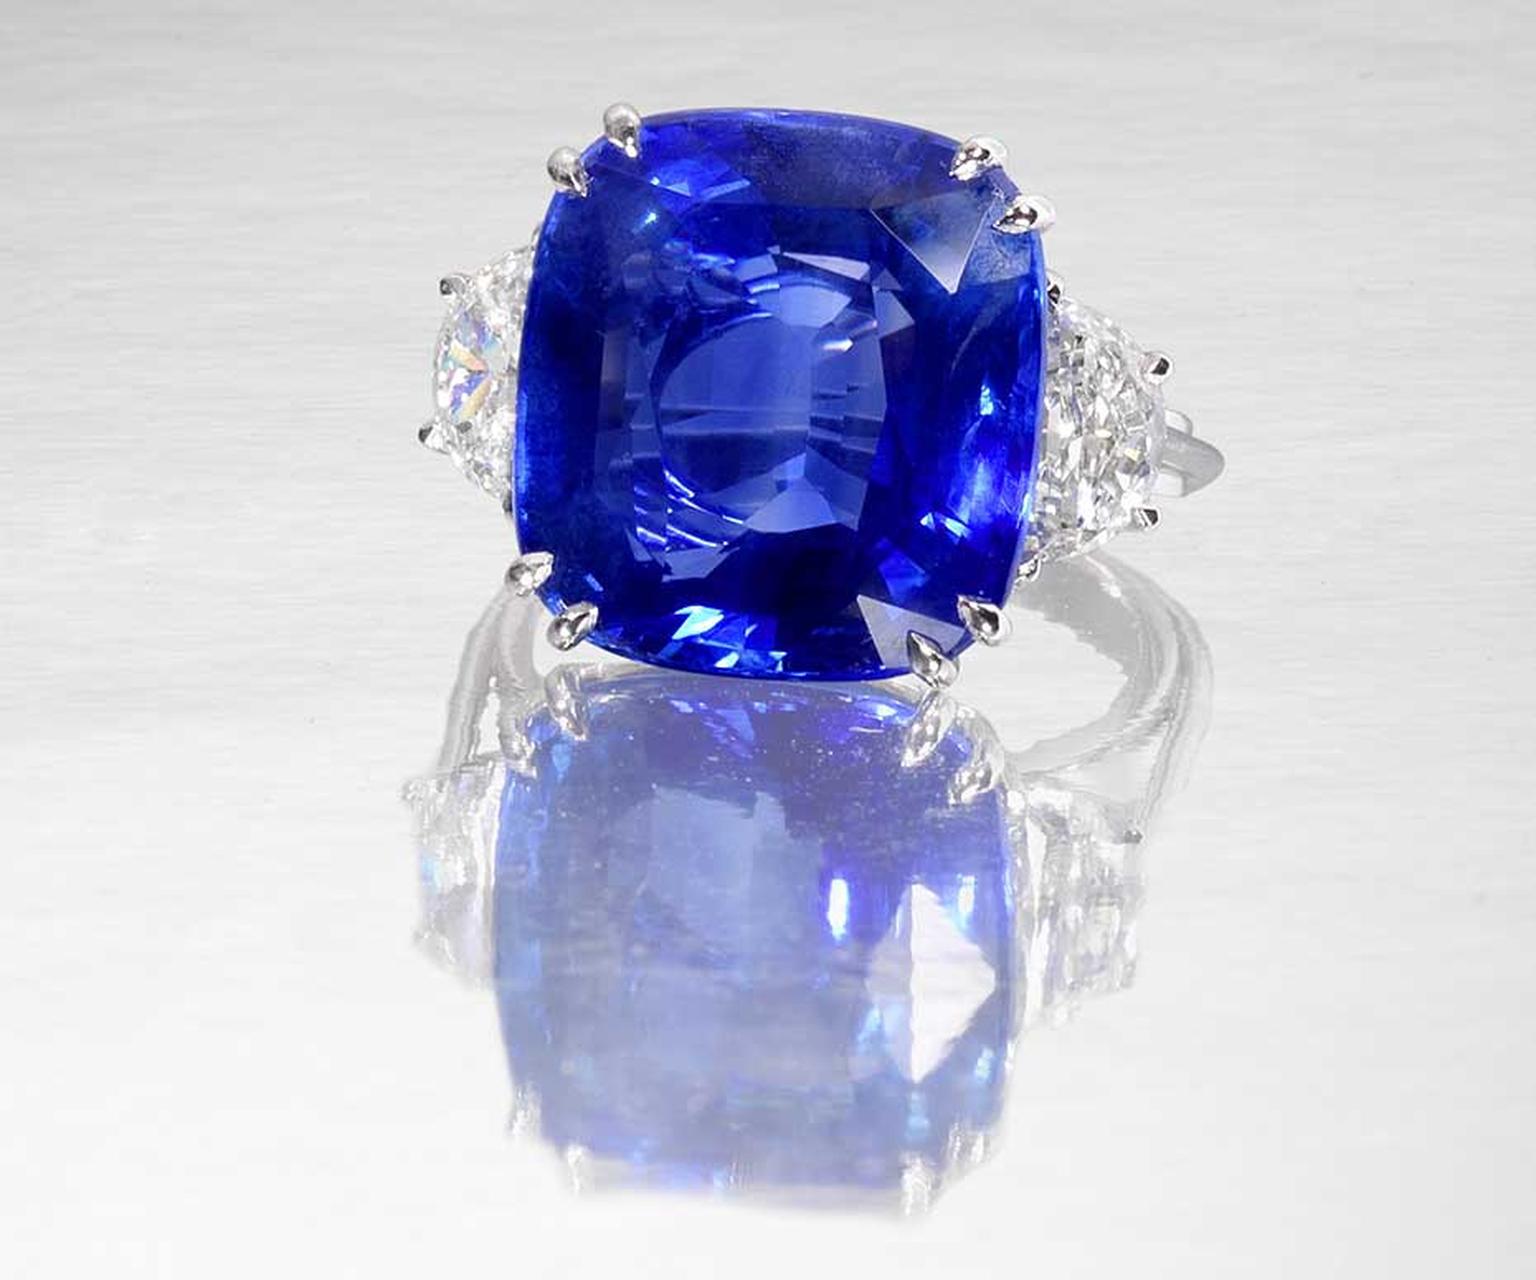 Lot 190, a Burmese sapphire and diamond ring. The cushion-shaped sapphire weighs 22.18ct, flanked on either side by demi lune-shaped diamonds. Sold for £326,500 (estimate: £175,000-200,000)